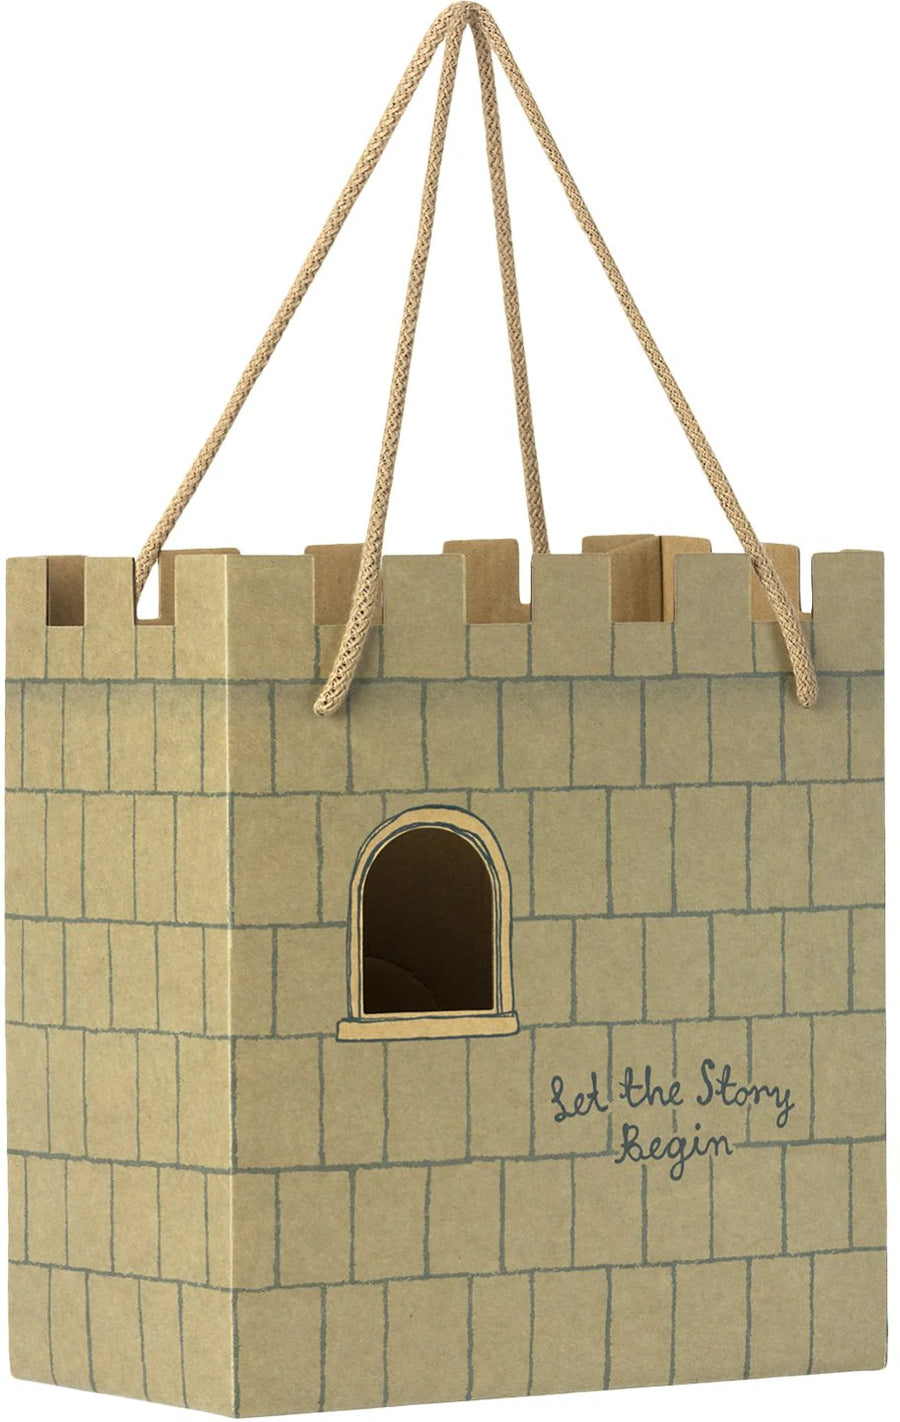 castle shaped paper bag with rope handles